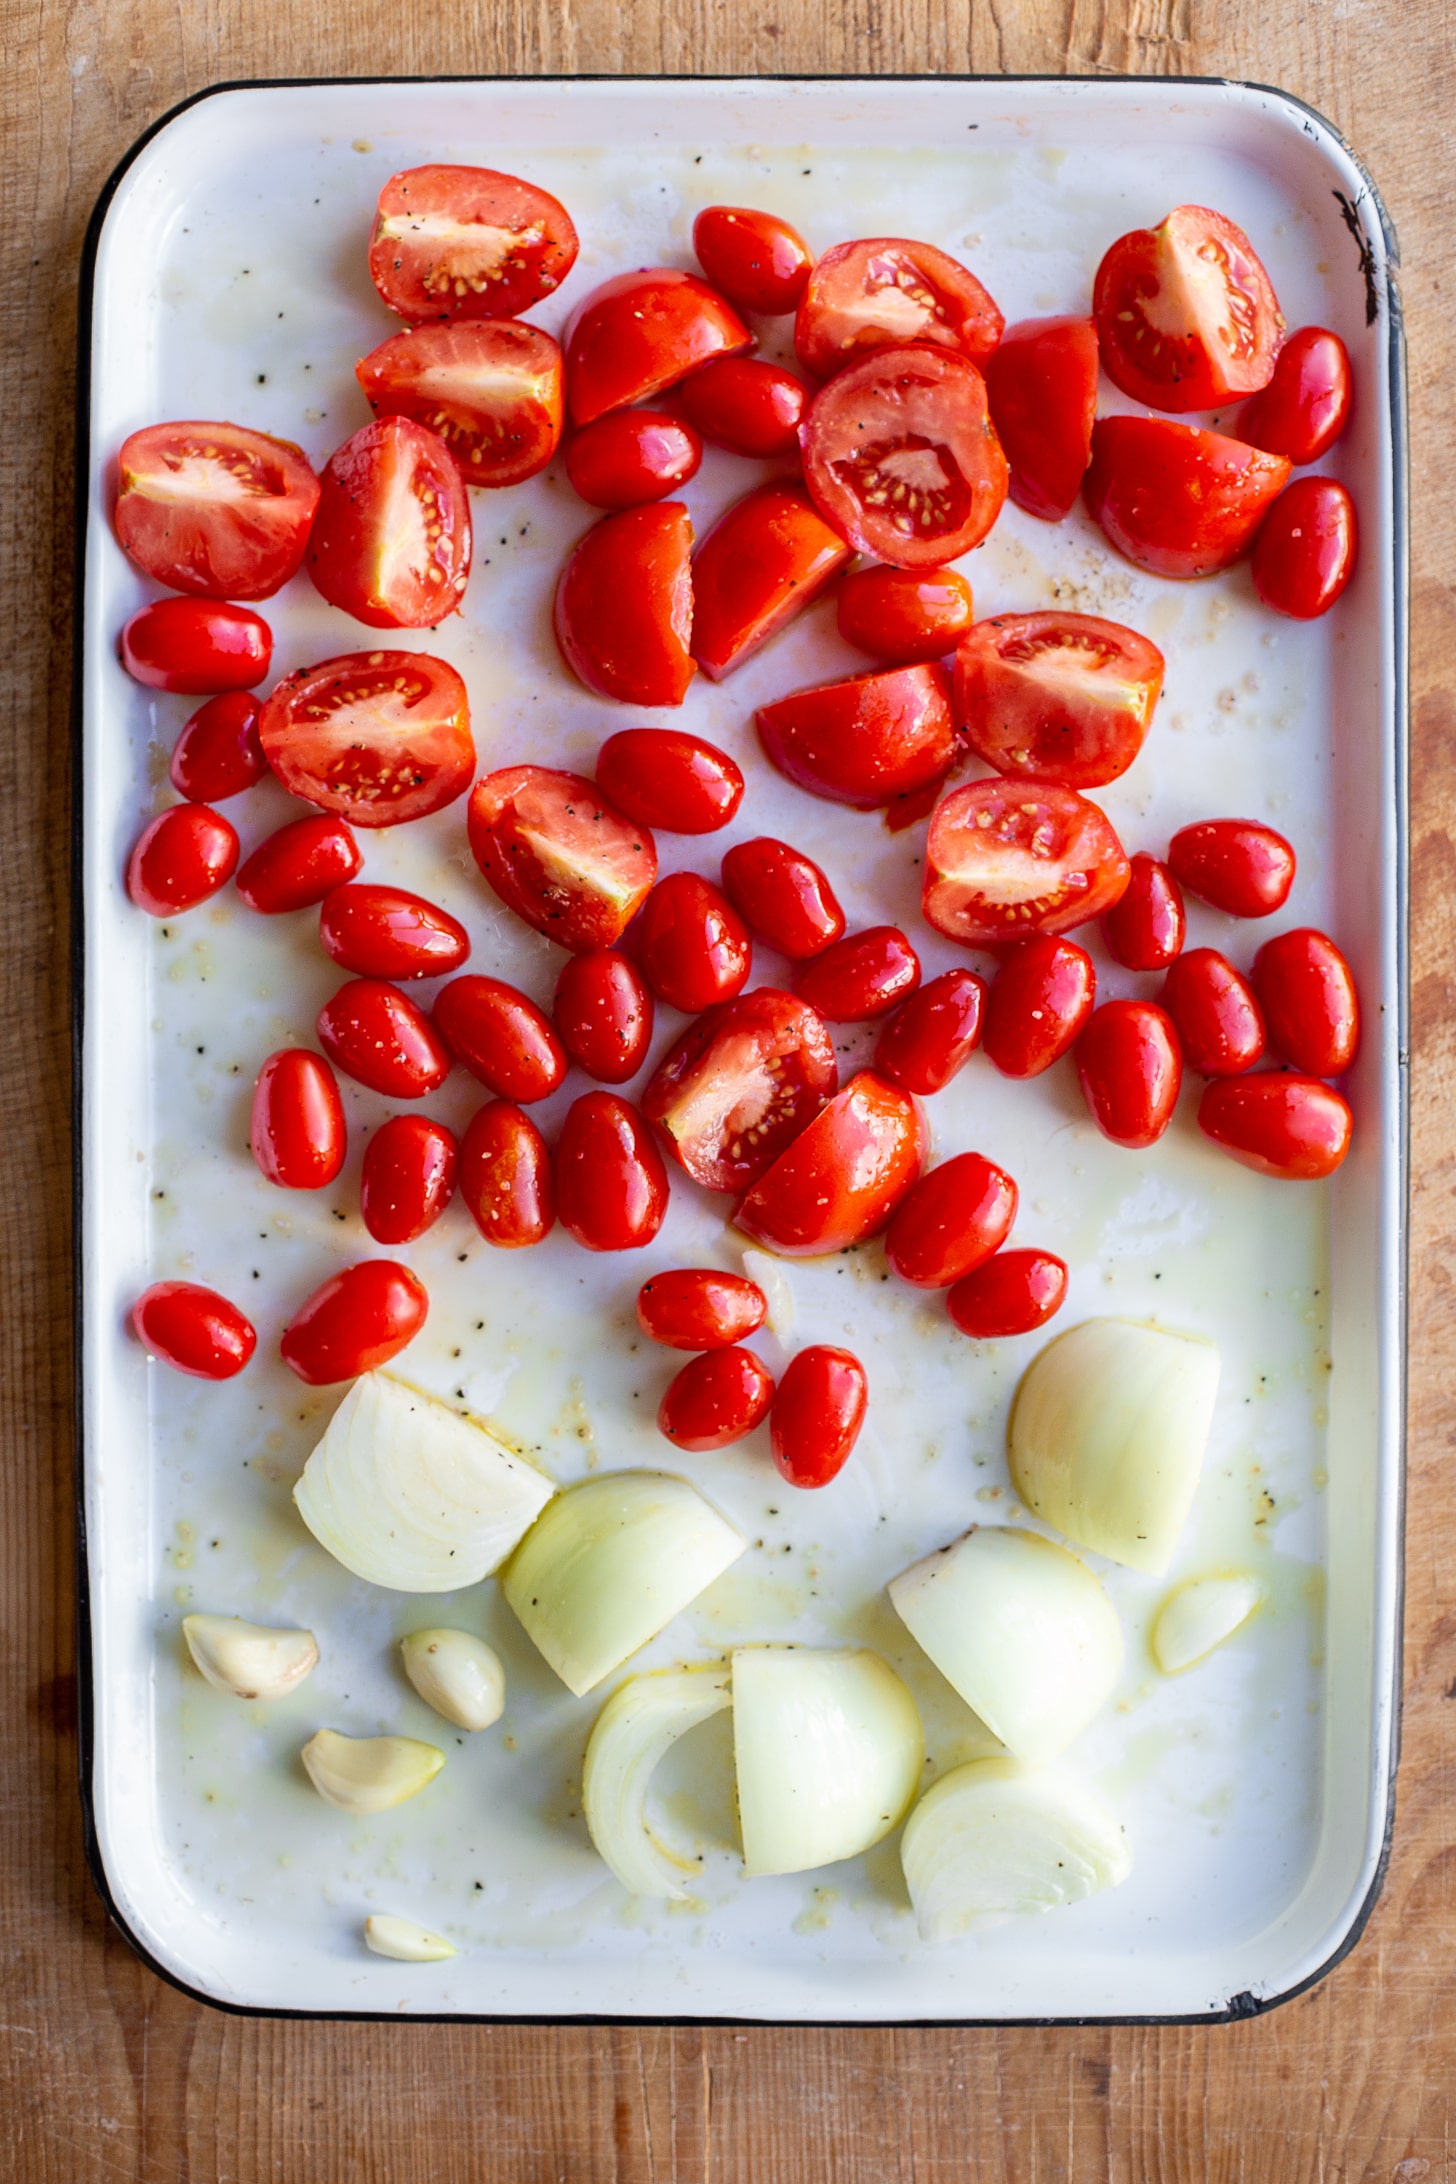 Raw tomatoes, onions and garlic on a sheet pan.